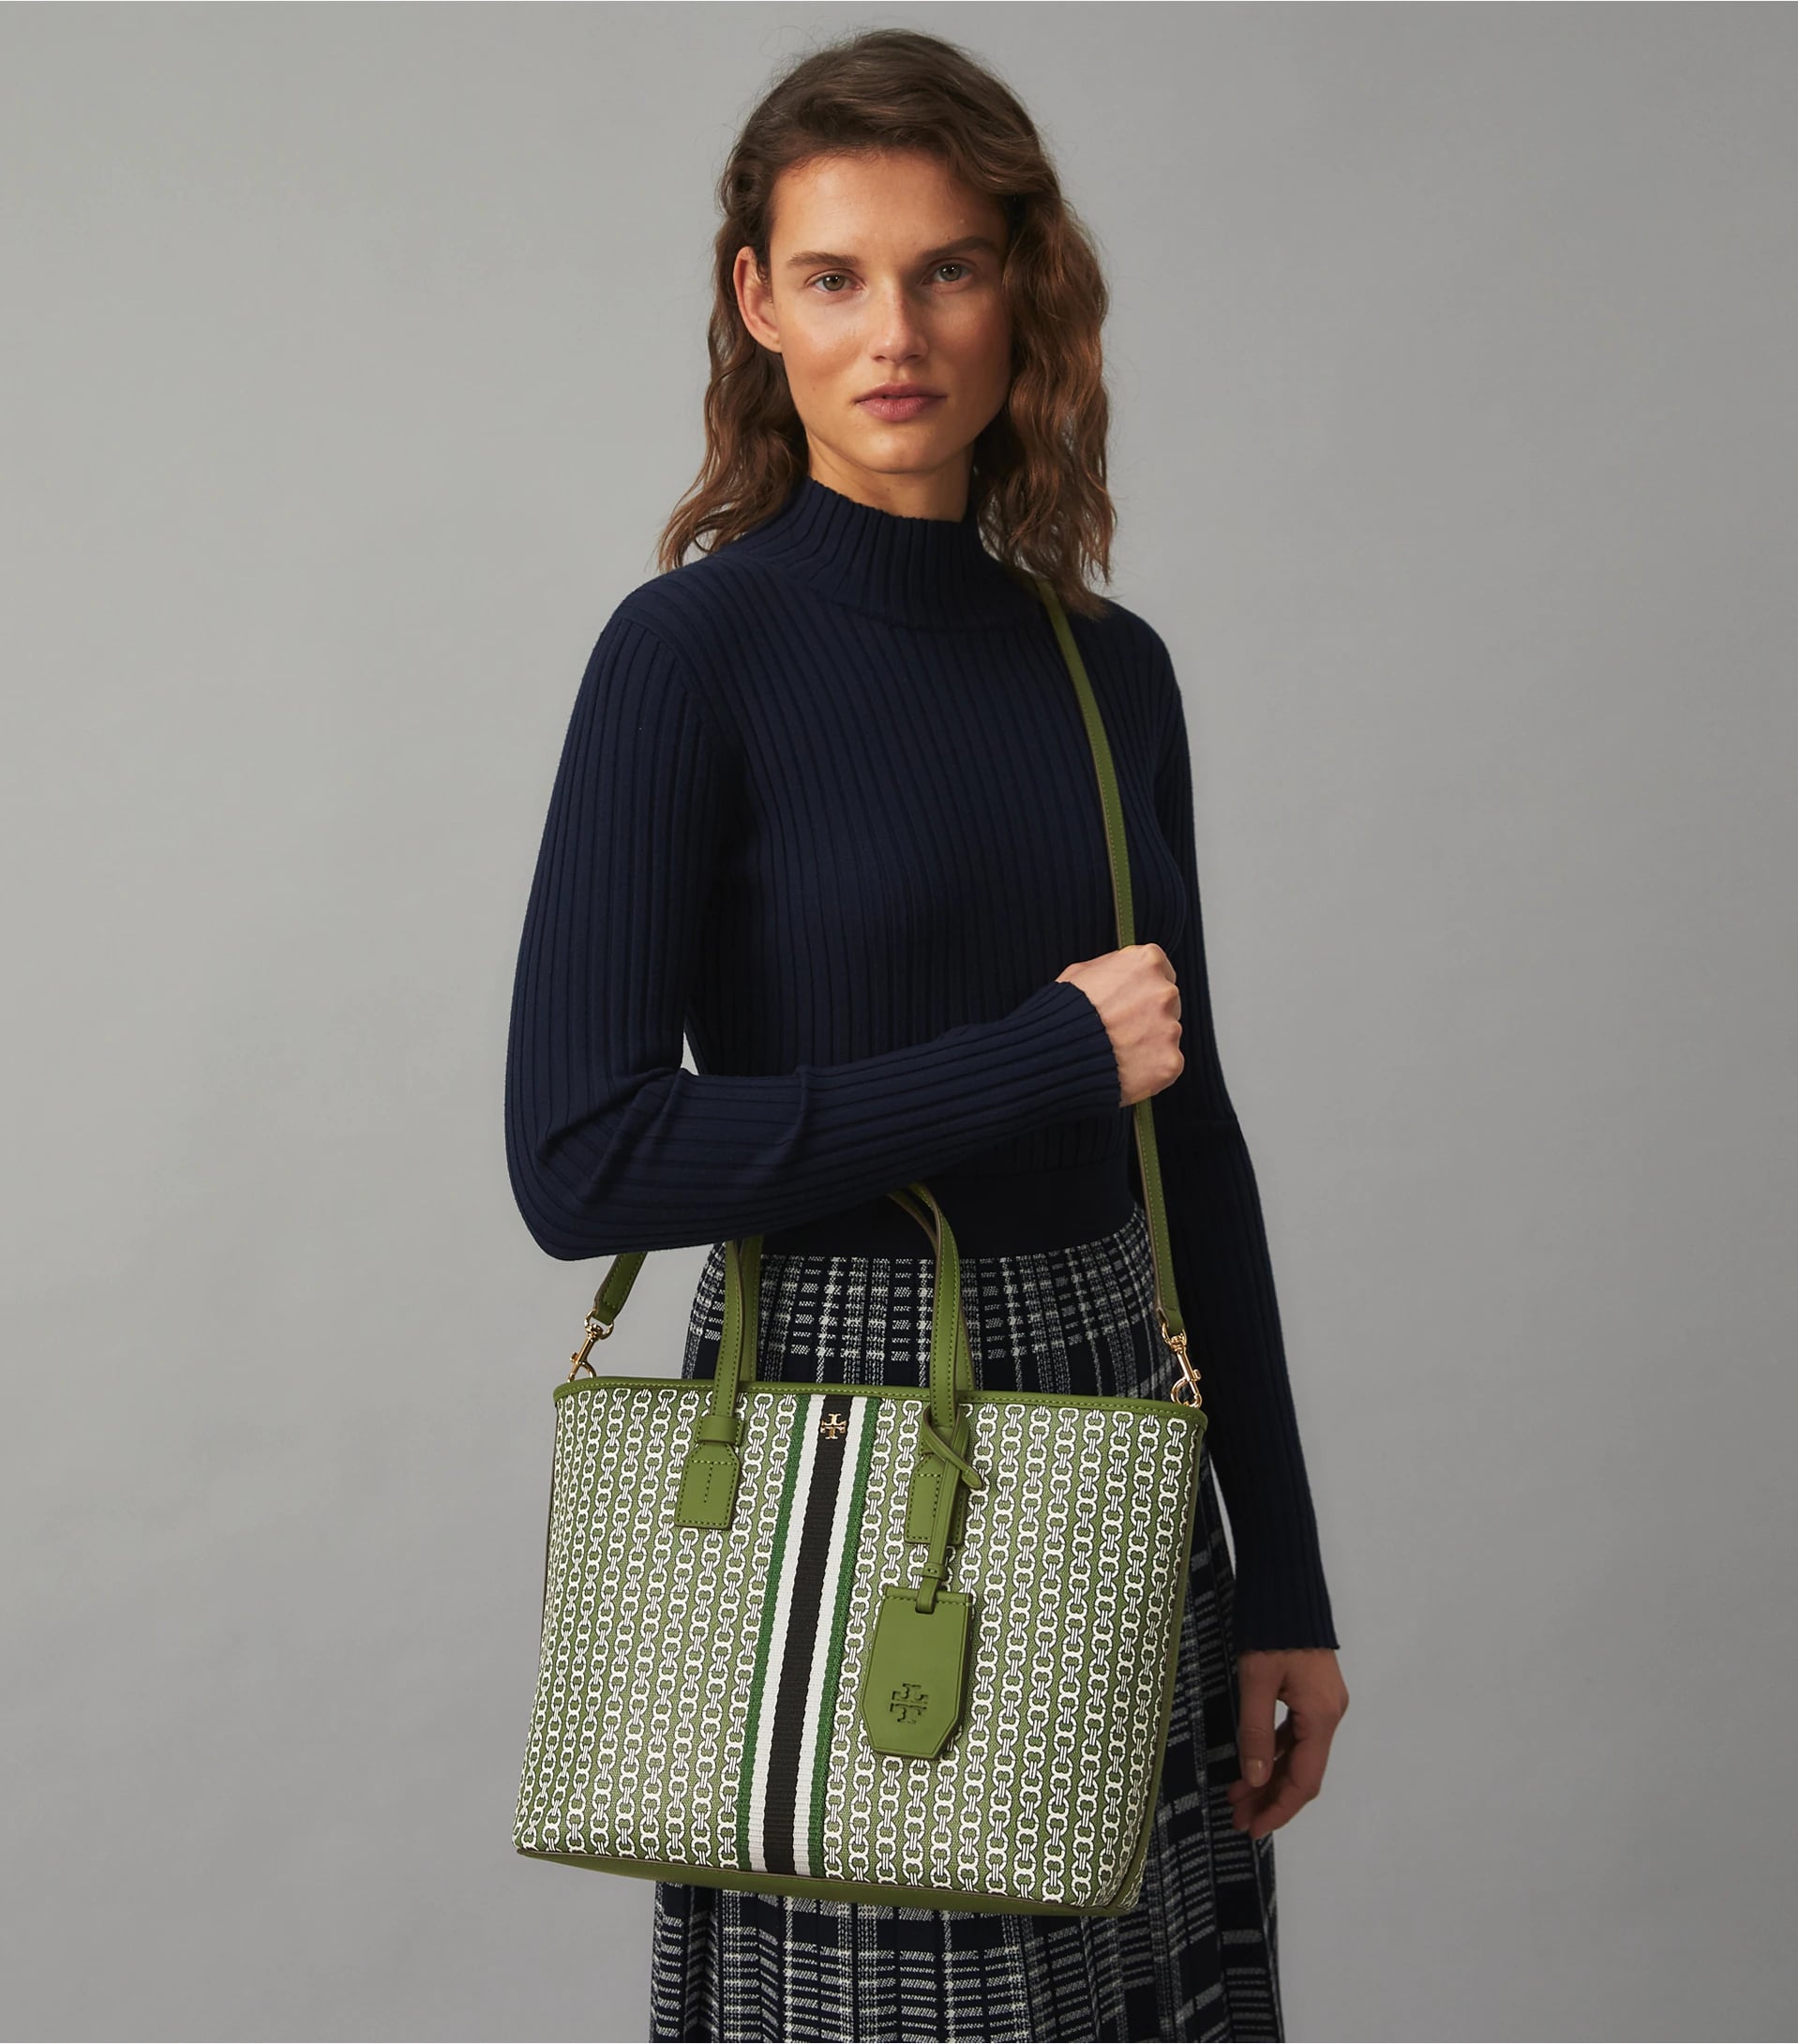 Tory Burch Gemini Small Tote Shop Online, Save 70% 